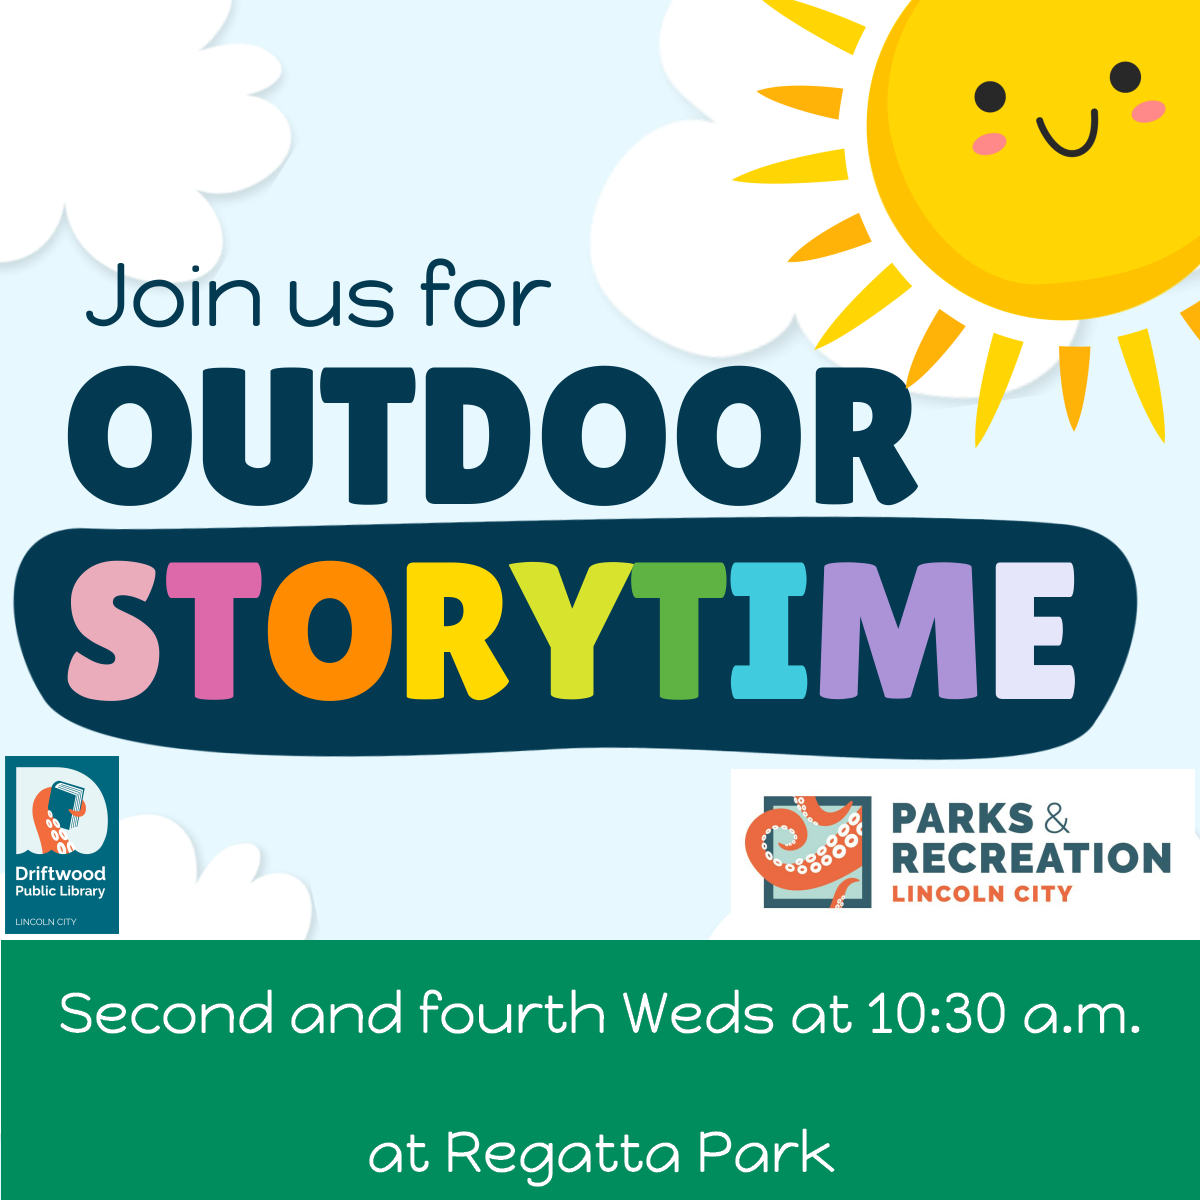 Outdoor storytime.